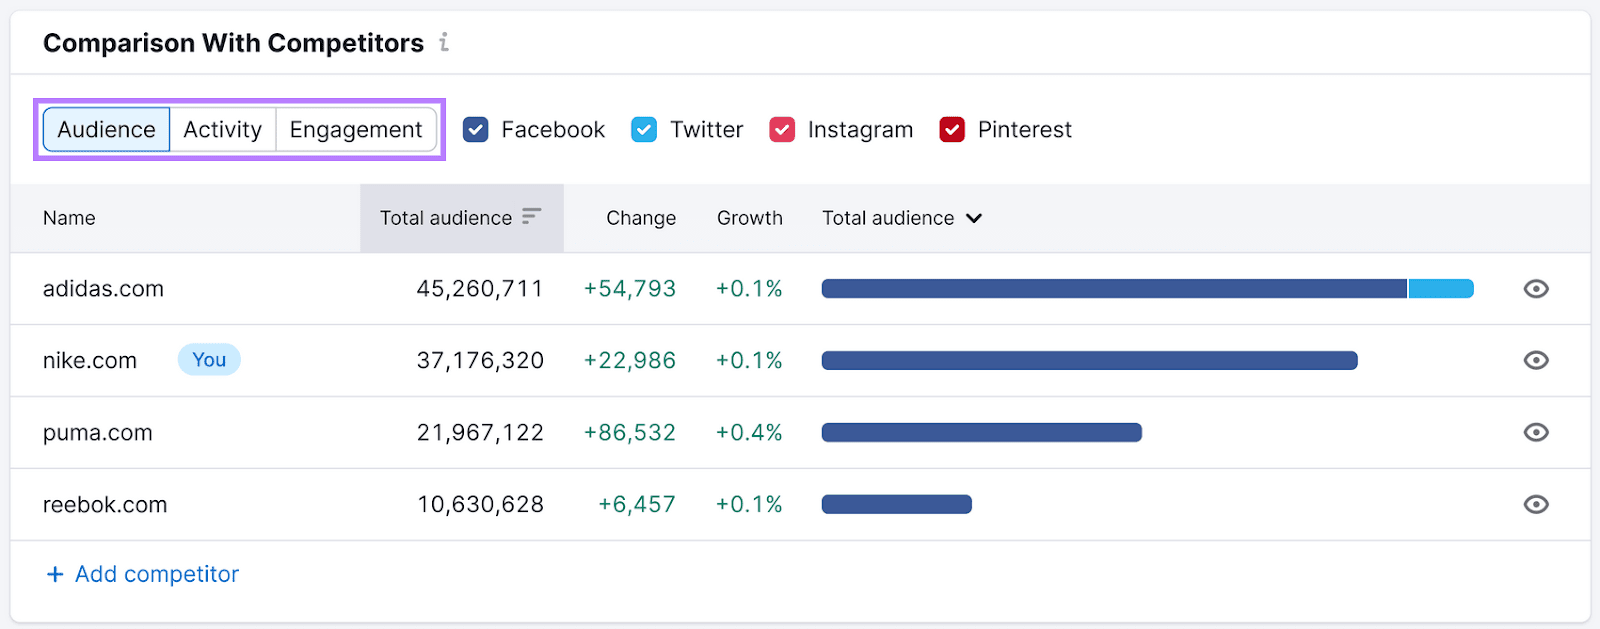 comparison with competitors table in Social Tracker tool